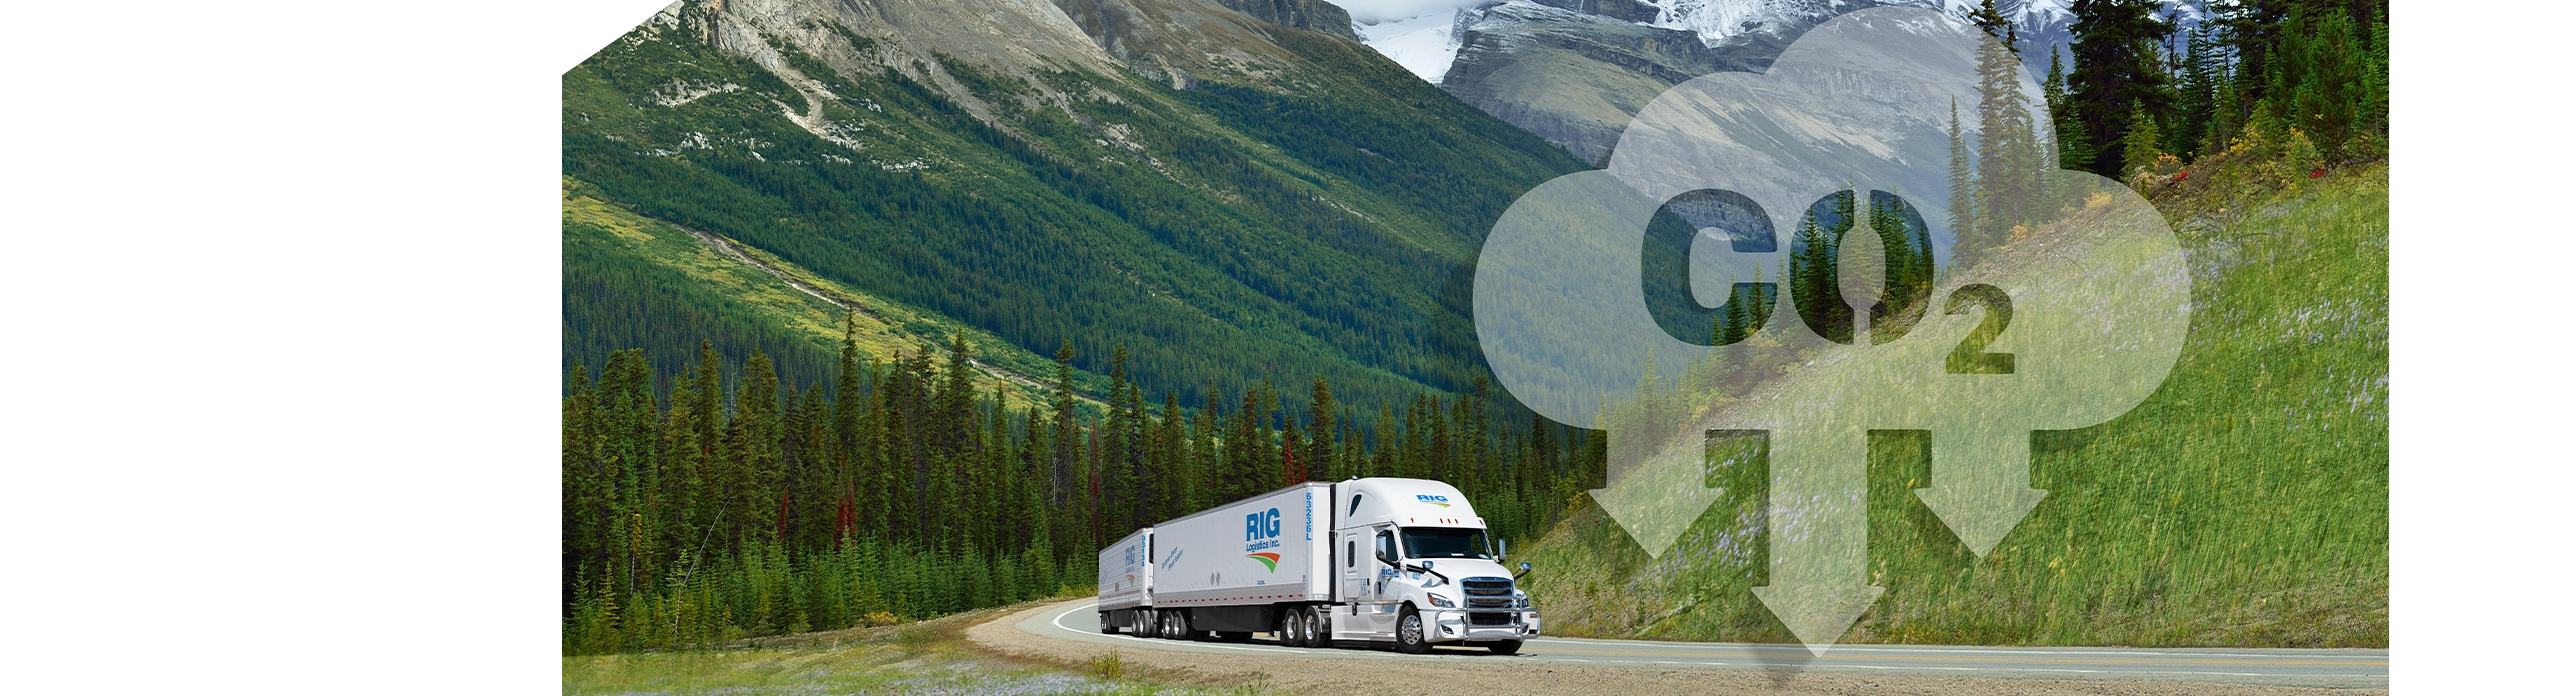 Eco-friendly RIG Logistics long combination vehicle (LCV) driving on Western Canadian highway